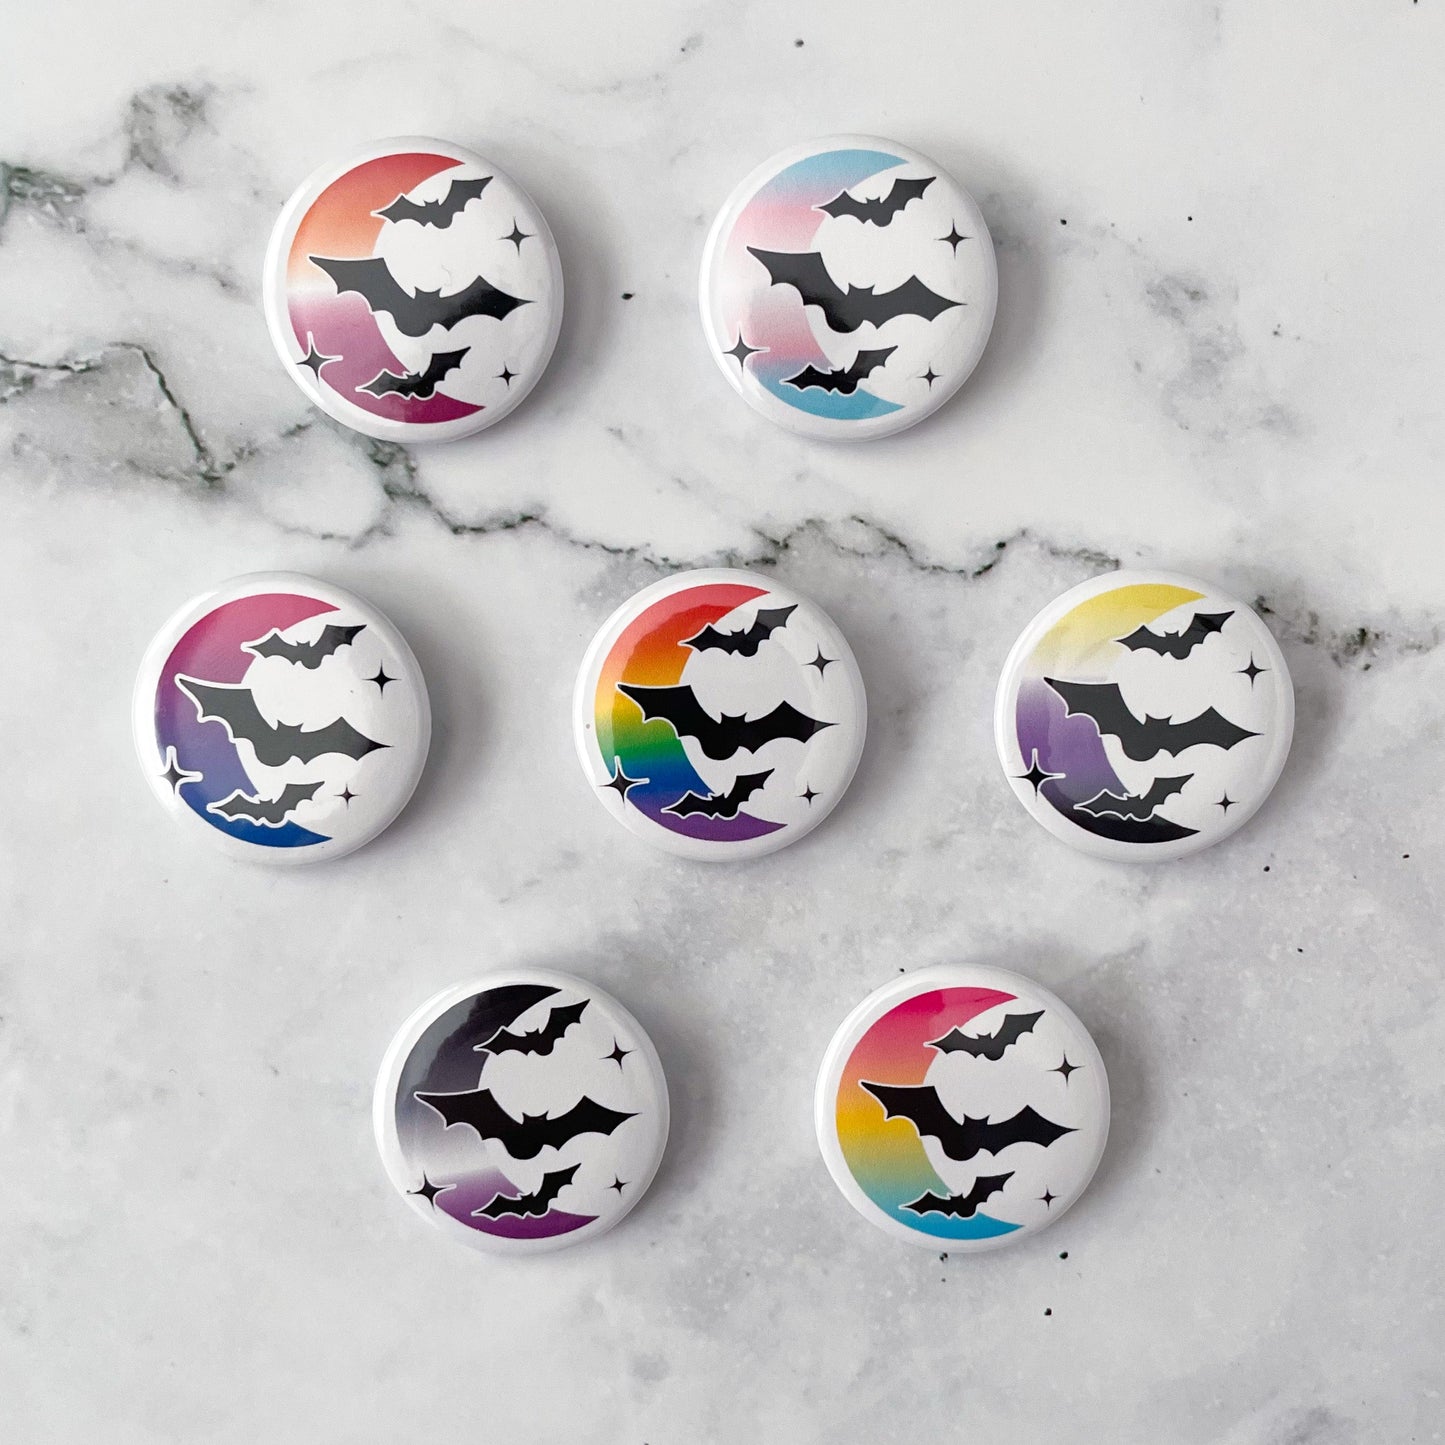 Asexual Pride Button / Badge (Buy 4 Get 1 FREE)